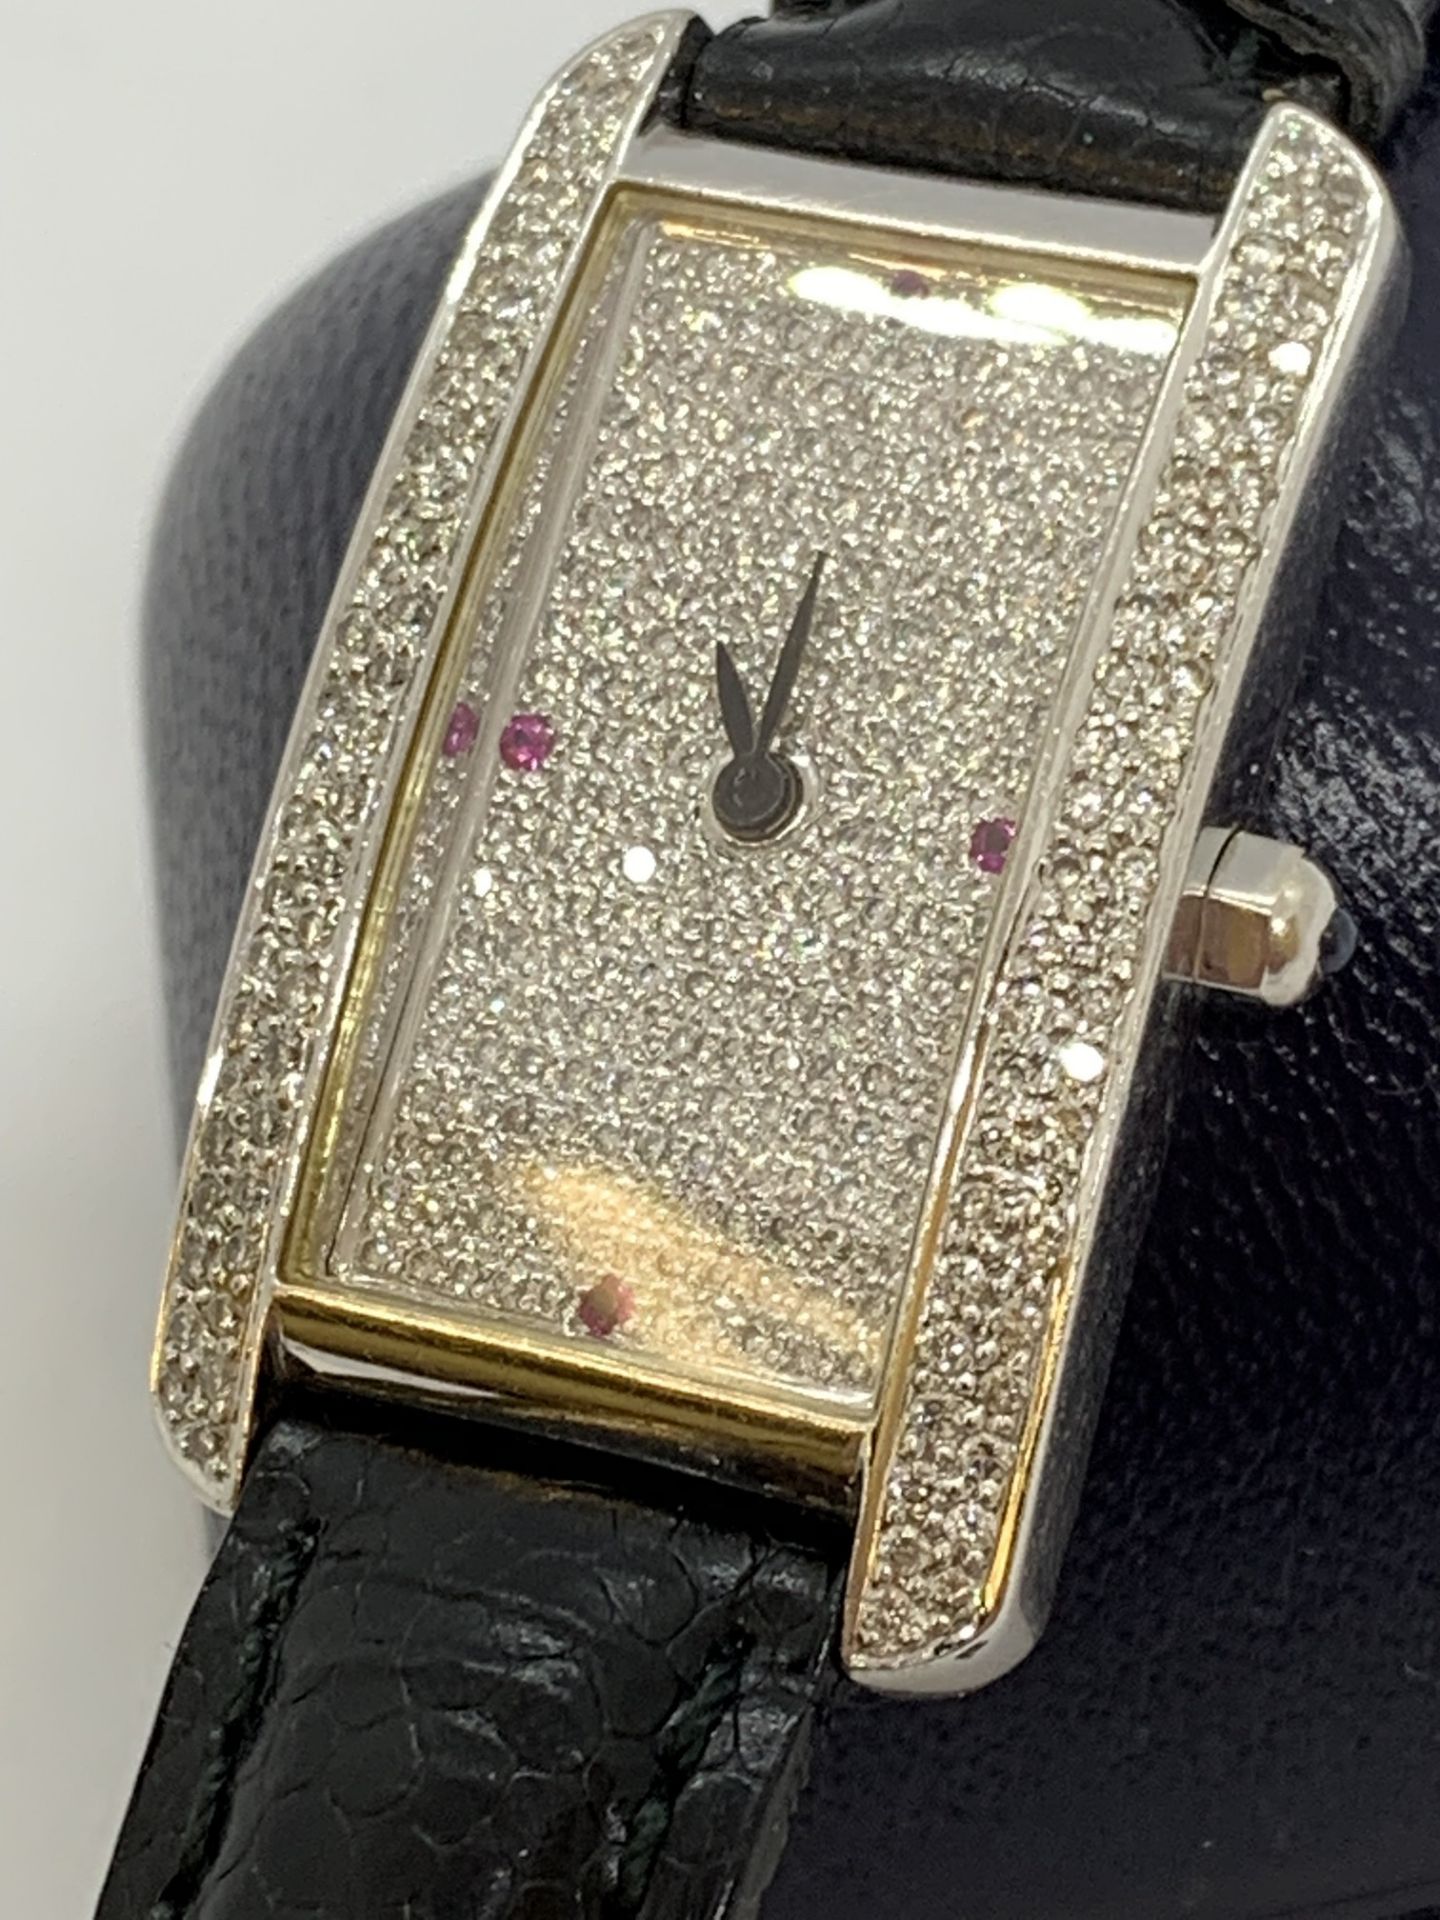 18ct GOLD CARTIER STYLE WATCH SET WITH DIAMONDS & RUBIES - Image 4 of 6